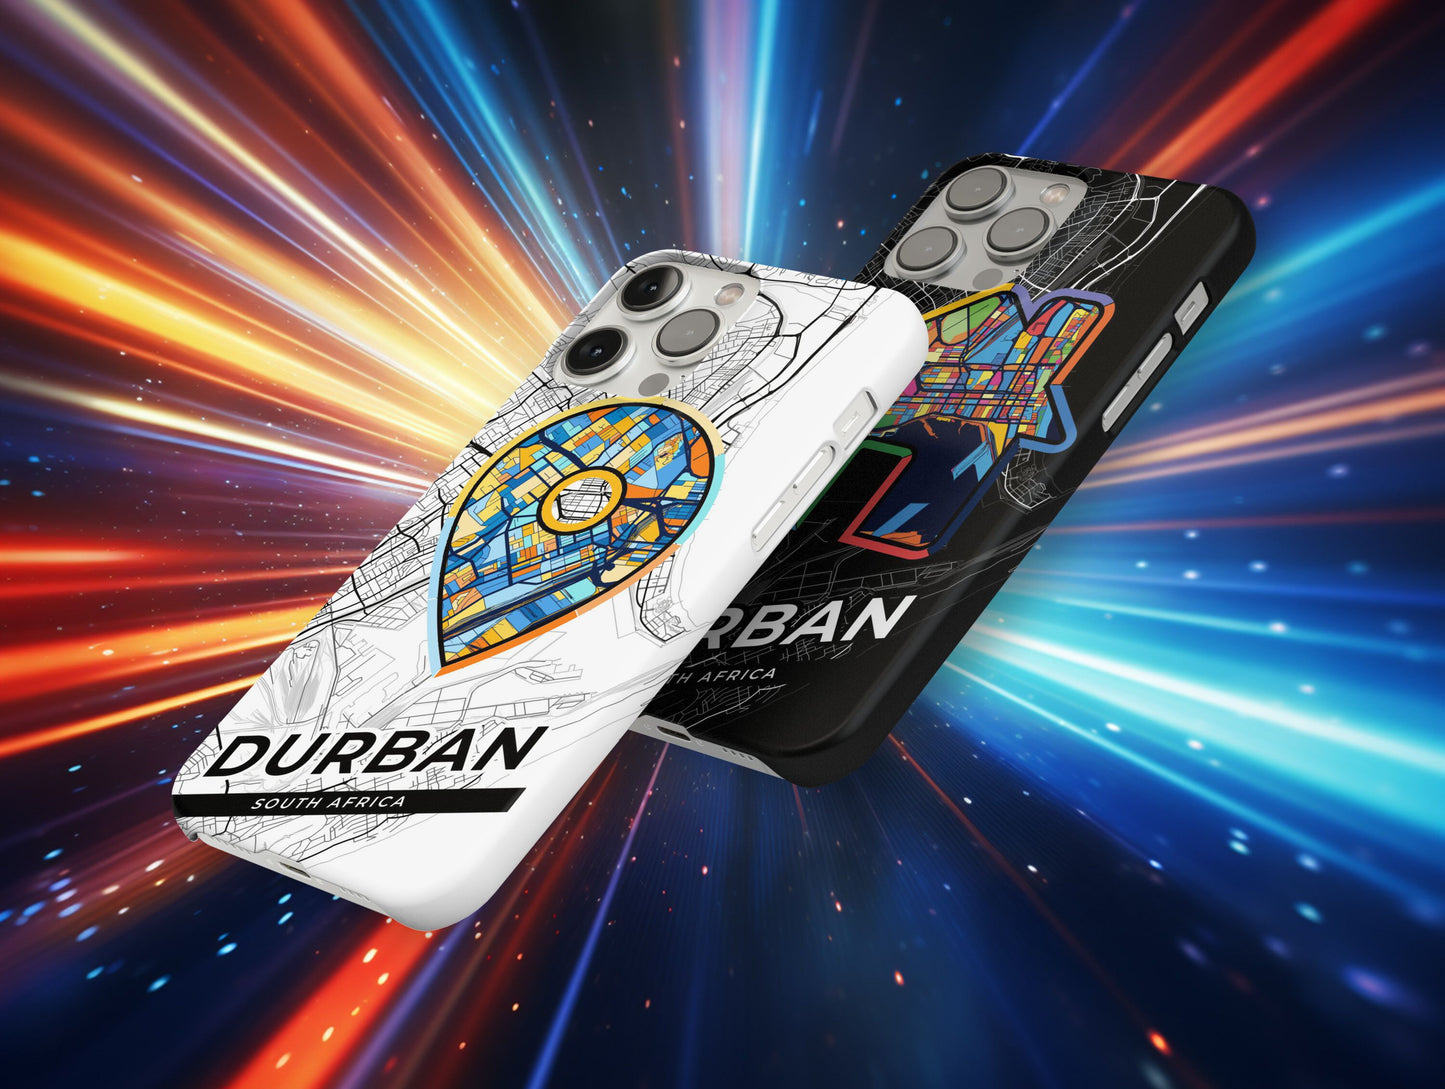 Durban South Africa slim phone case with colorful icon. Birthday, wedding or housewarming gift. Couple match cases.